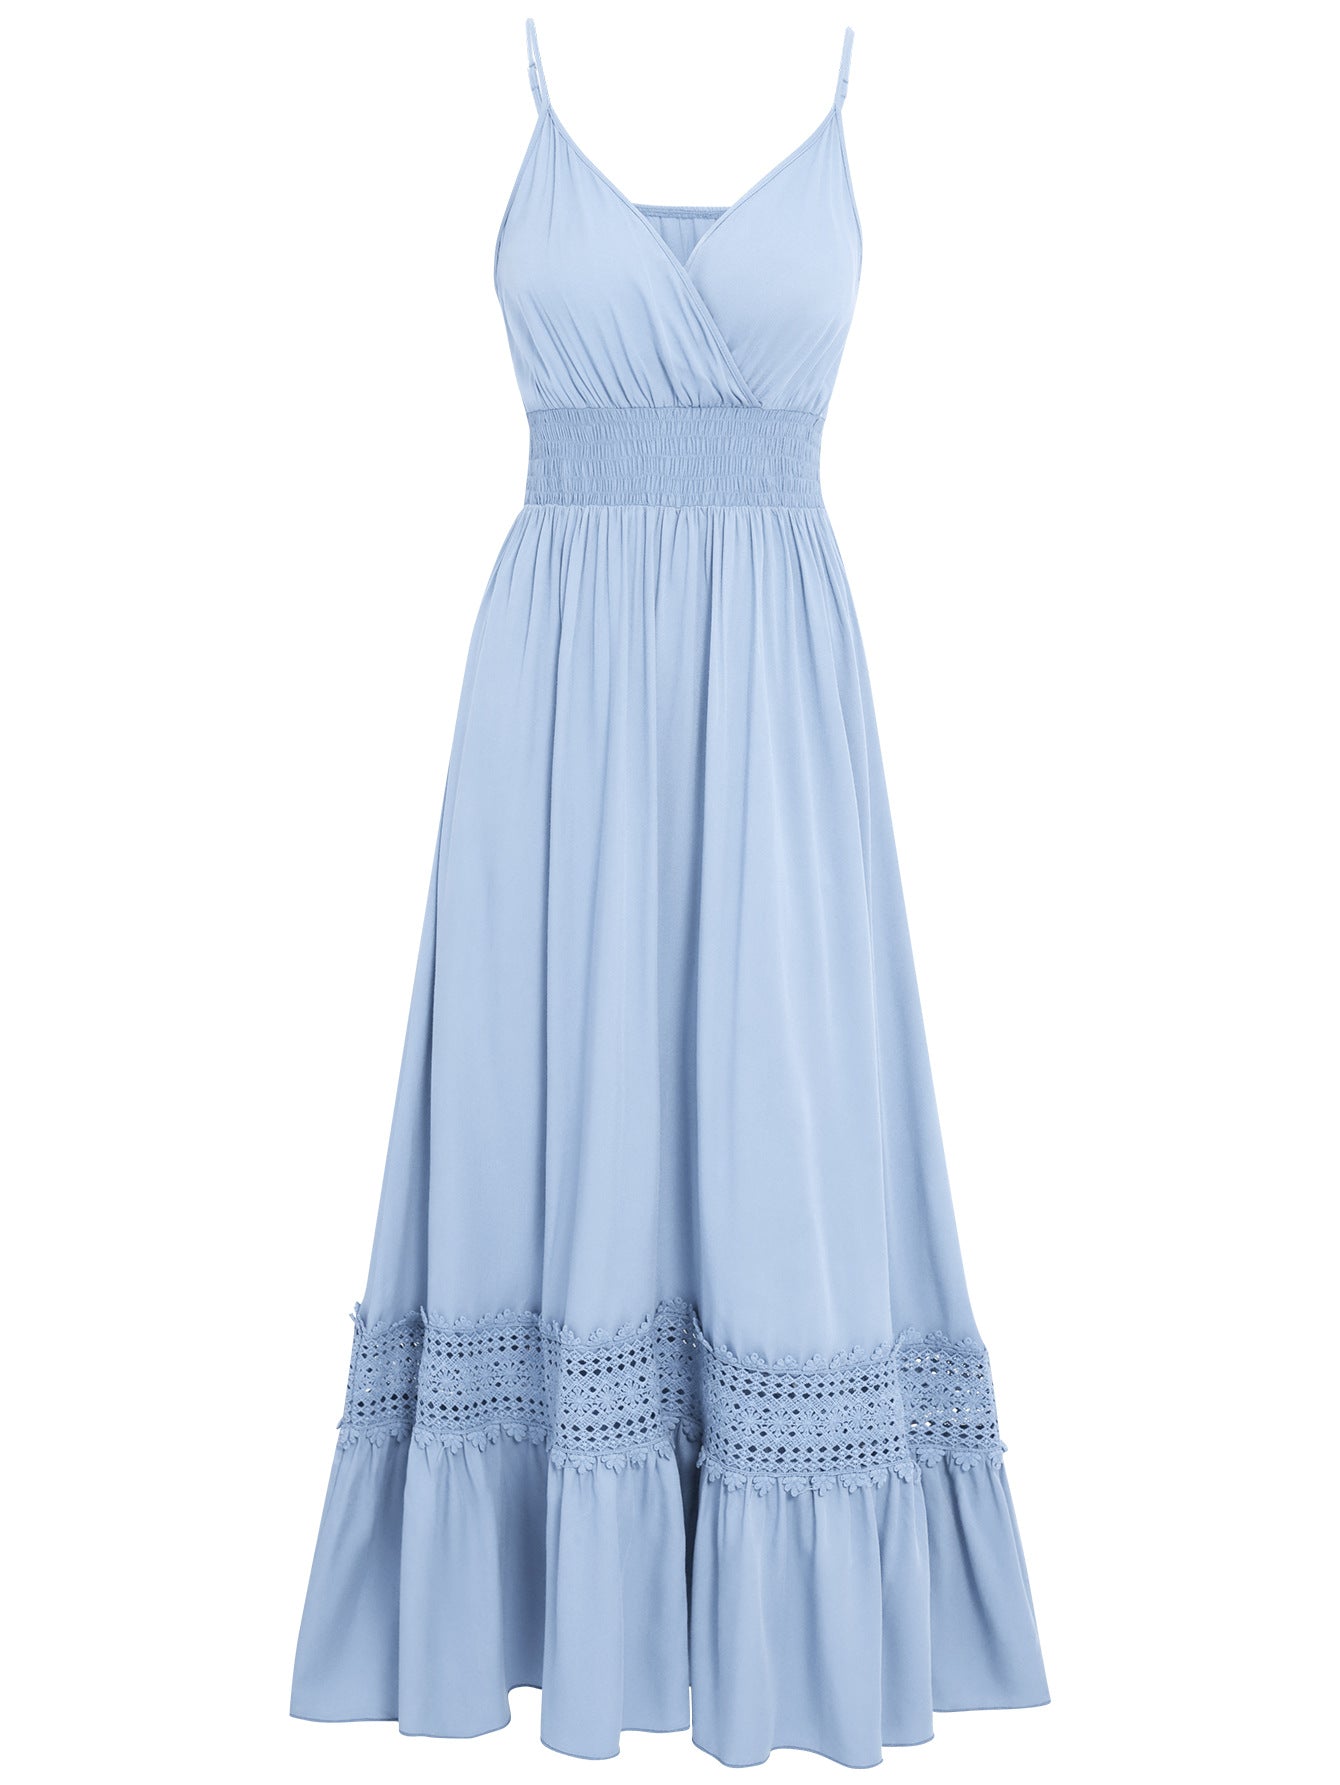 Casual Summer Daily Long Dresses